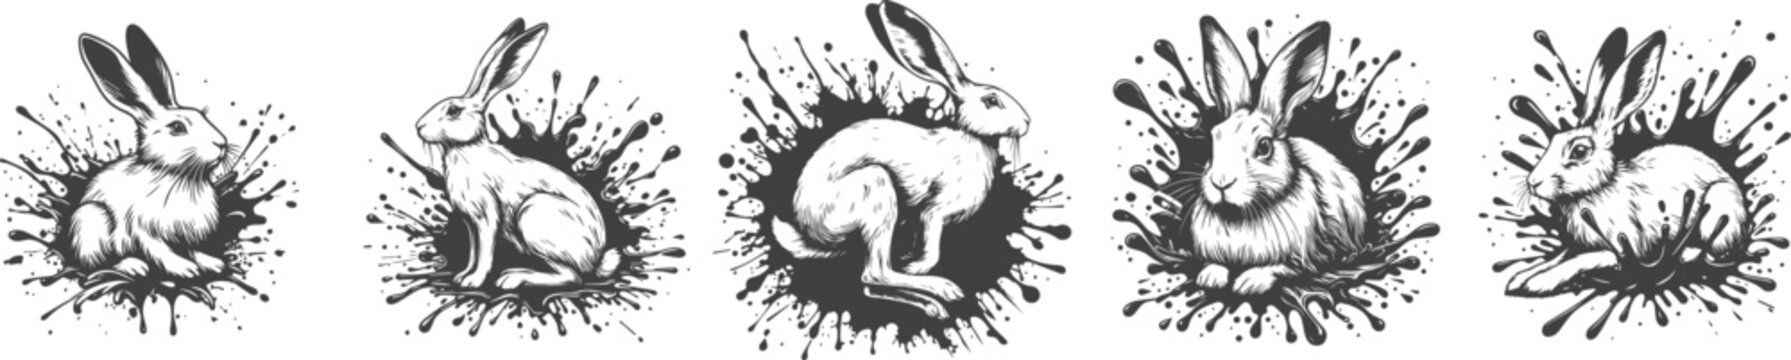 five hare, rabbits in paint splatter black and white vector set